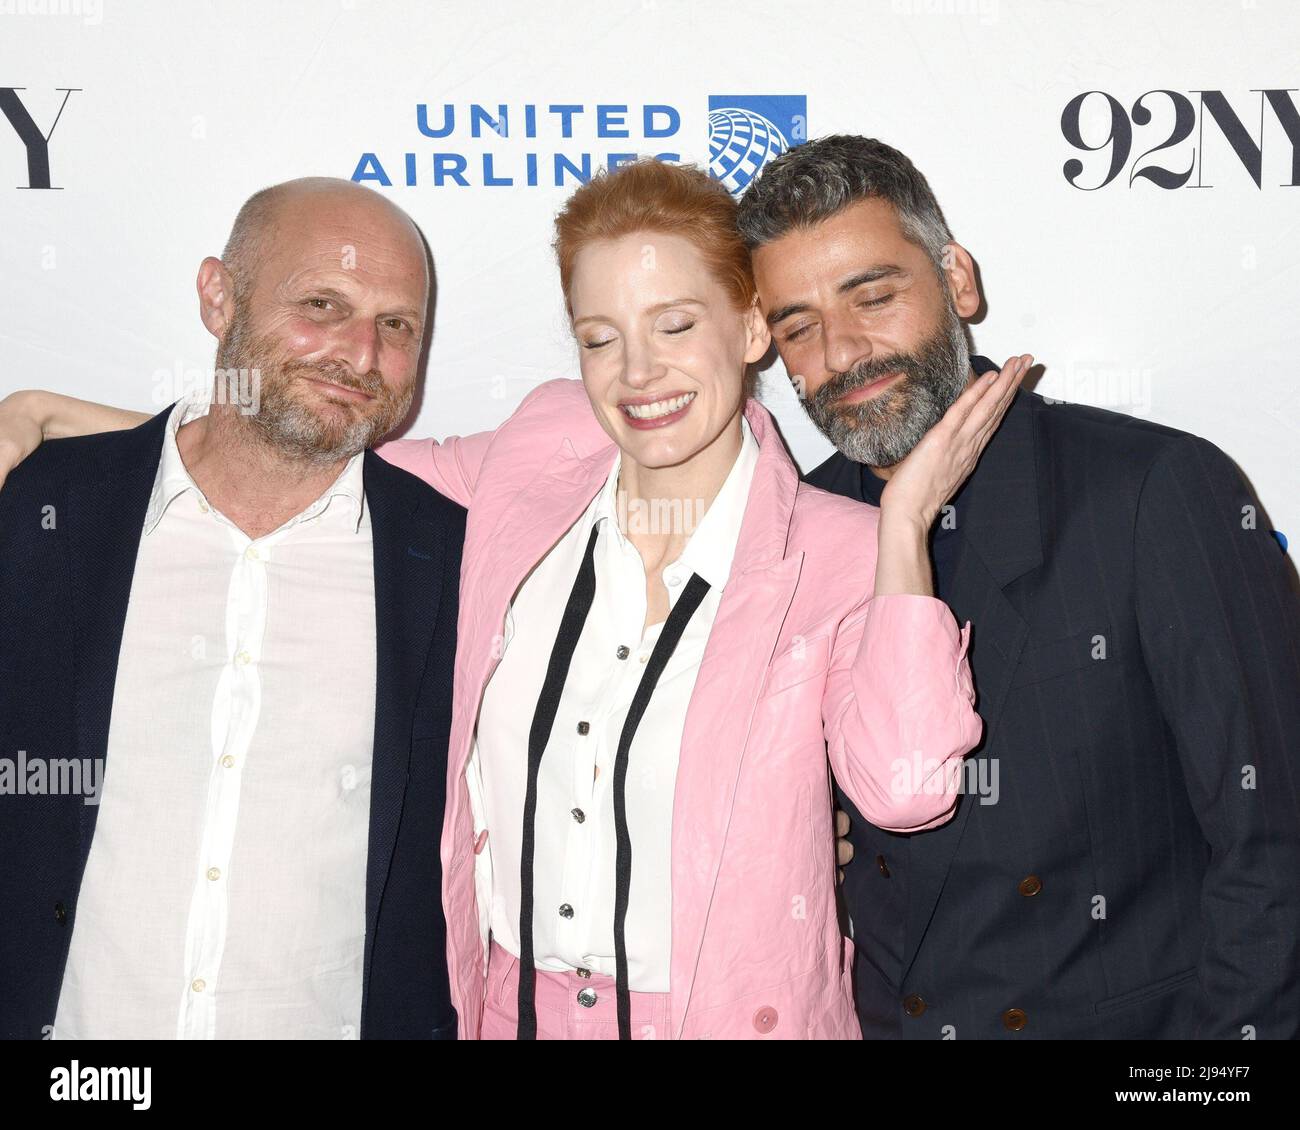 New York, NY, USA. 19th May, 2022. Hagai Levi, Jessica Chastain, Oscar Isaac in attendance for HBO's SCENES FROM A MARRIAGE at 92Y, The 92nd Street Y, New York, NY May 19, 2022. Credit: Quoin Pics/Everett Collection/Alamy Live News Stock Photo